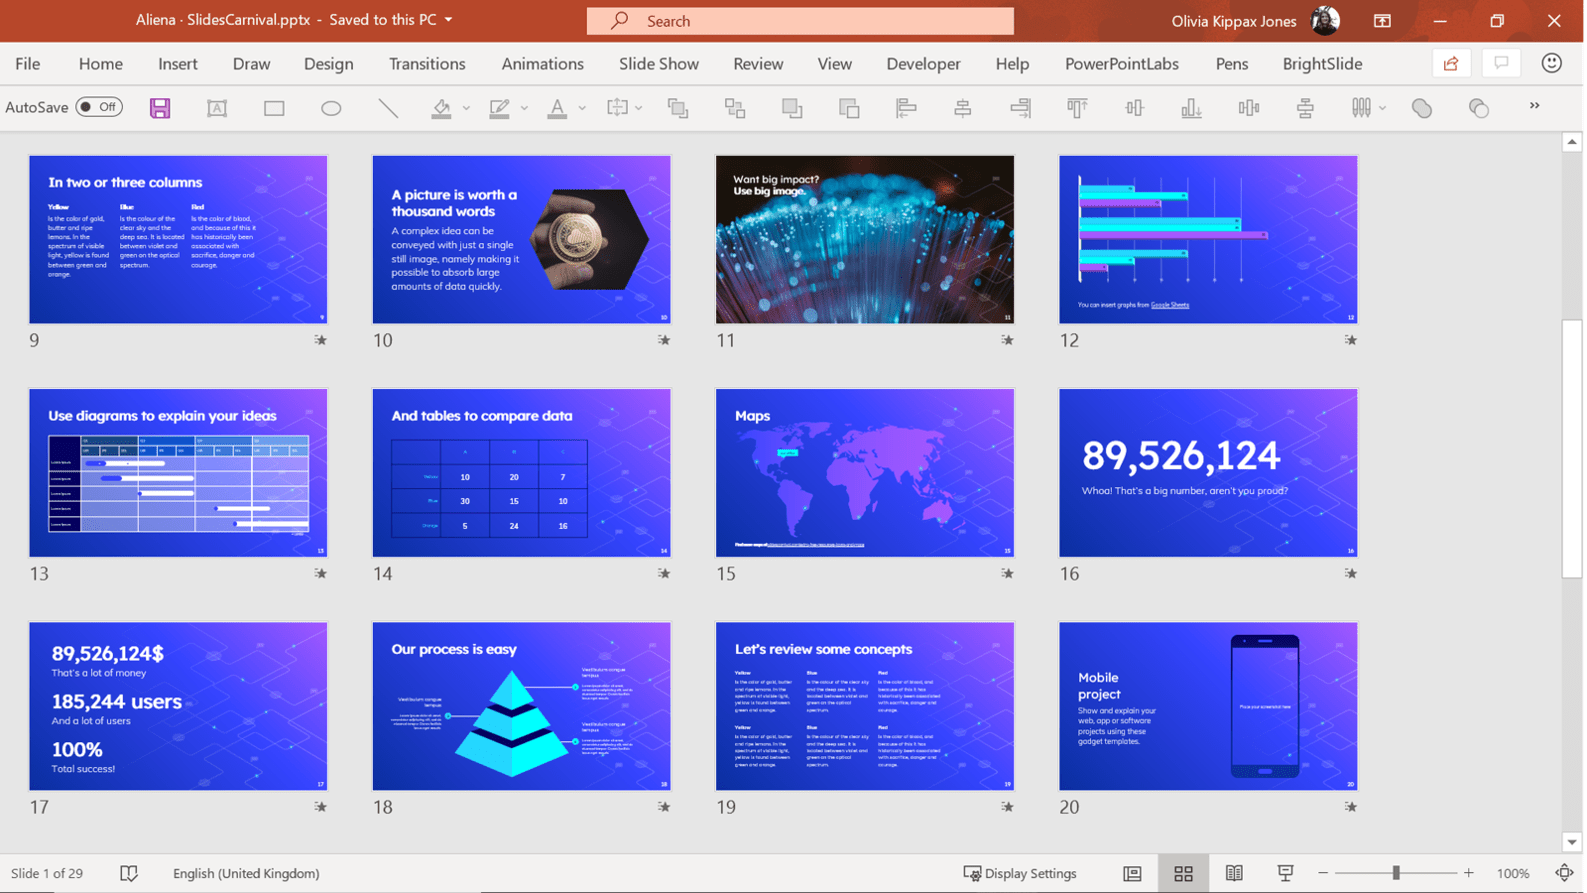 Best Free Powerpoint Template